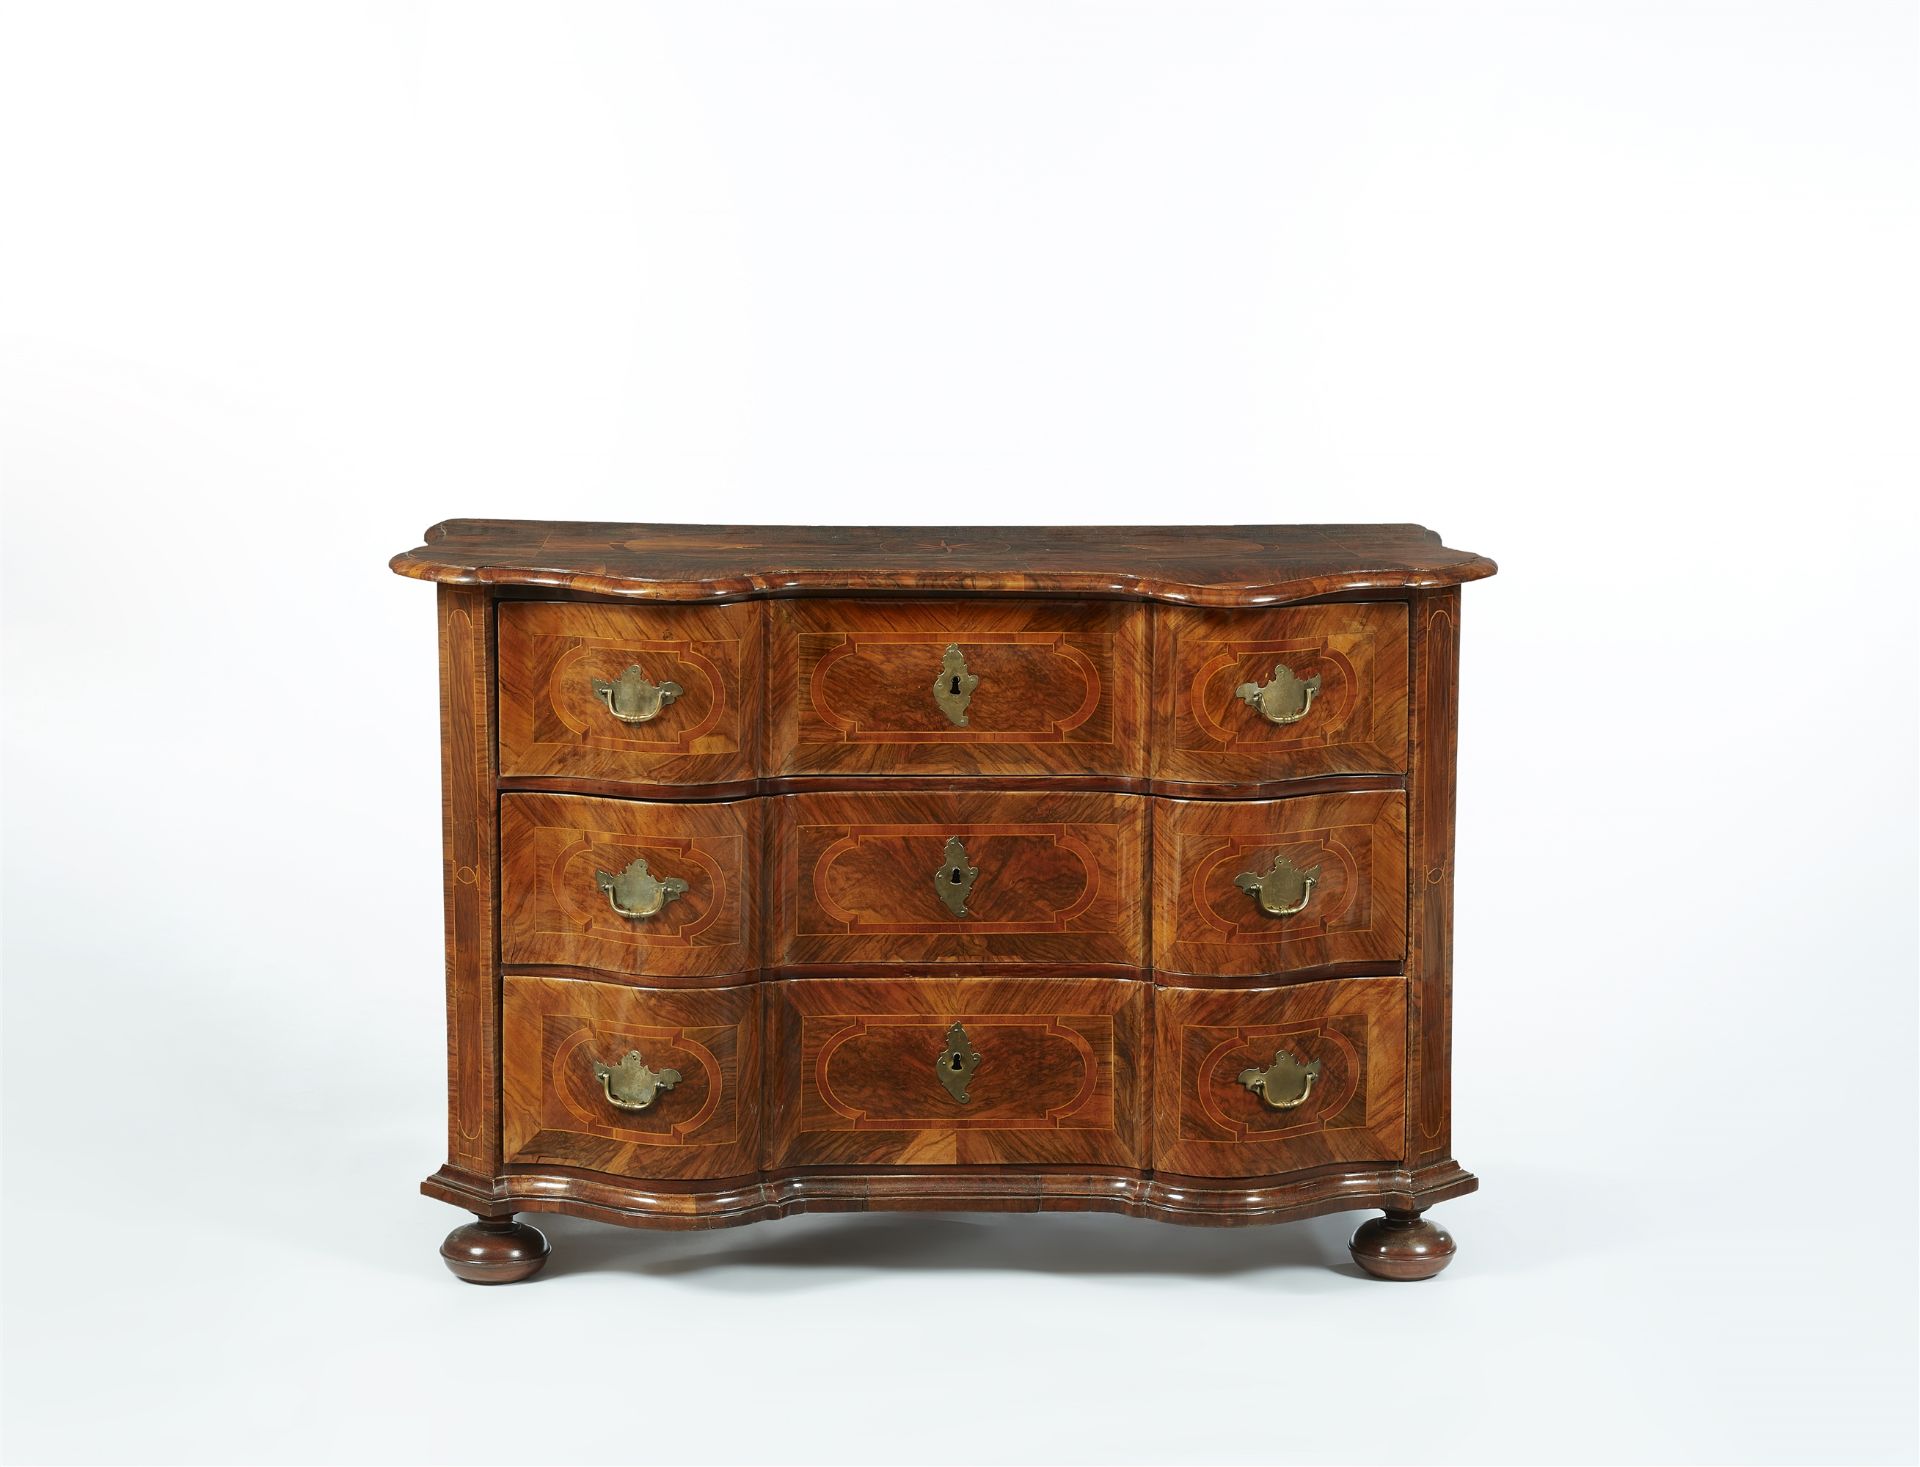 A German Baroque chest of drawers